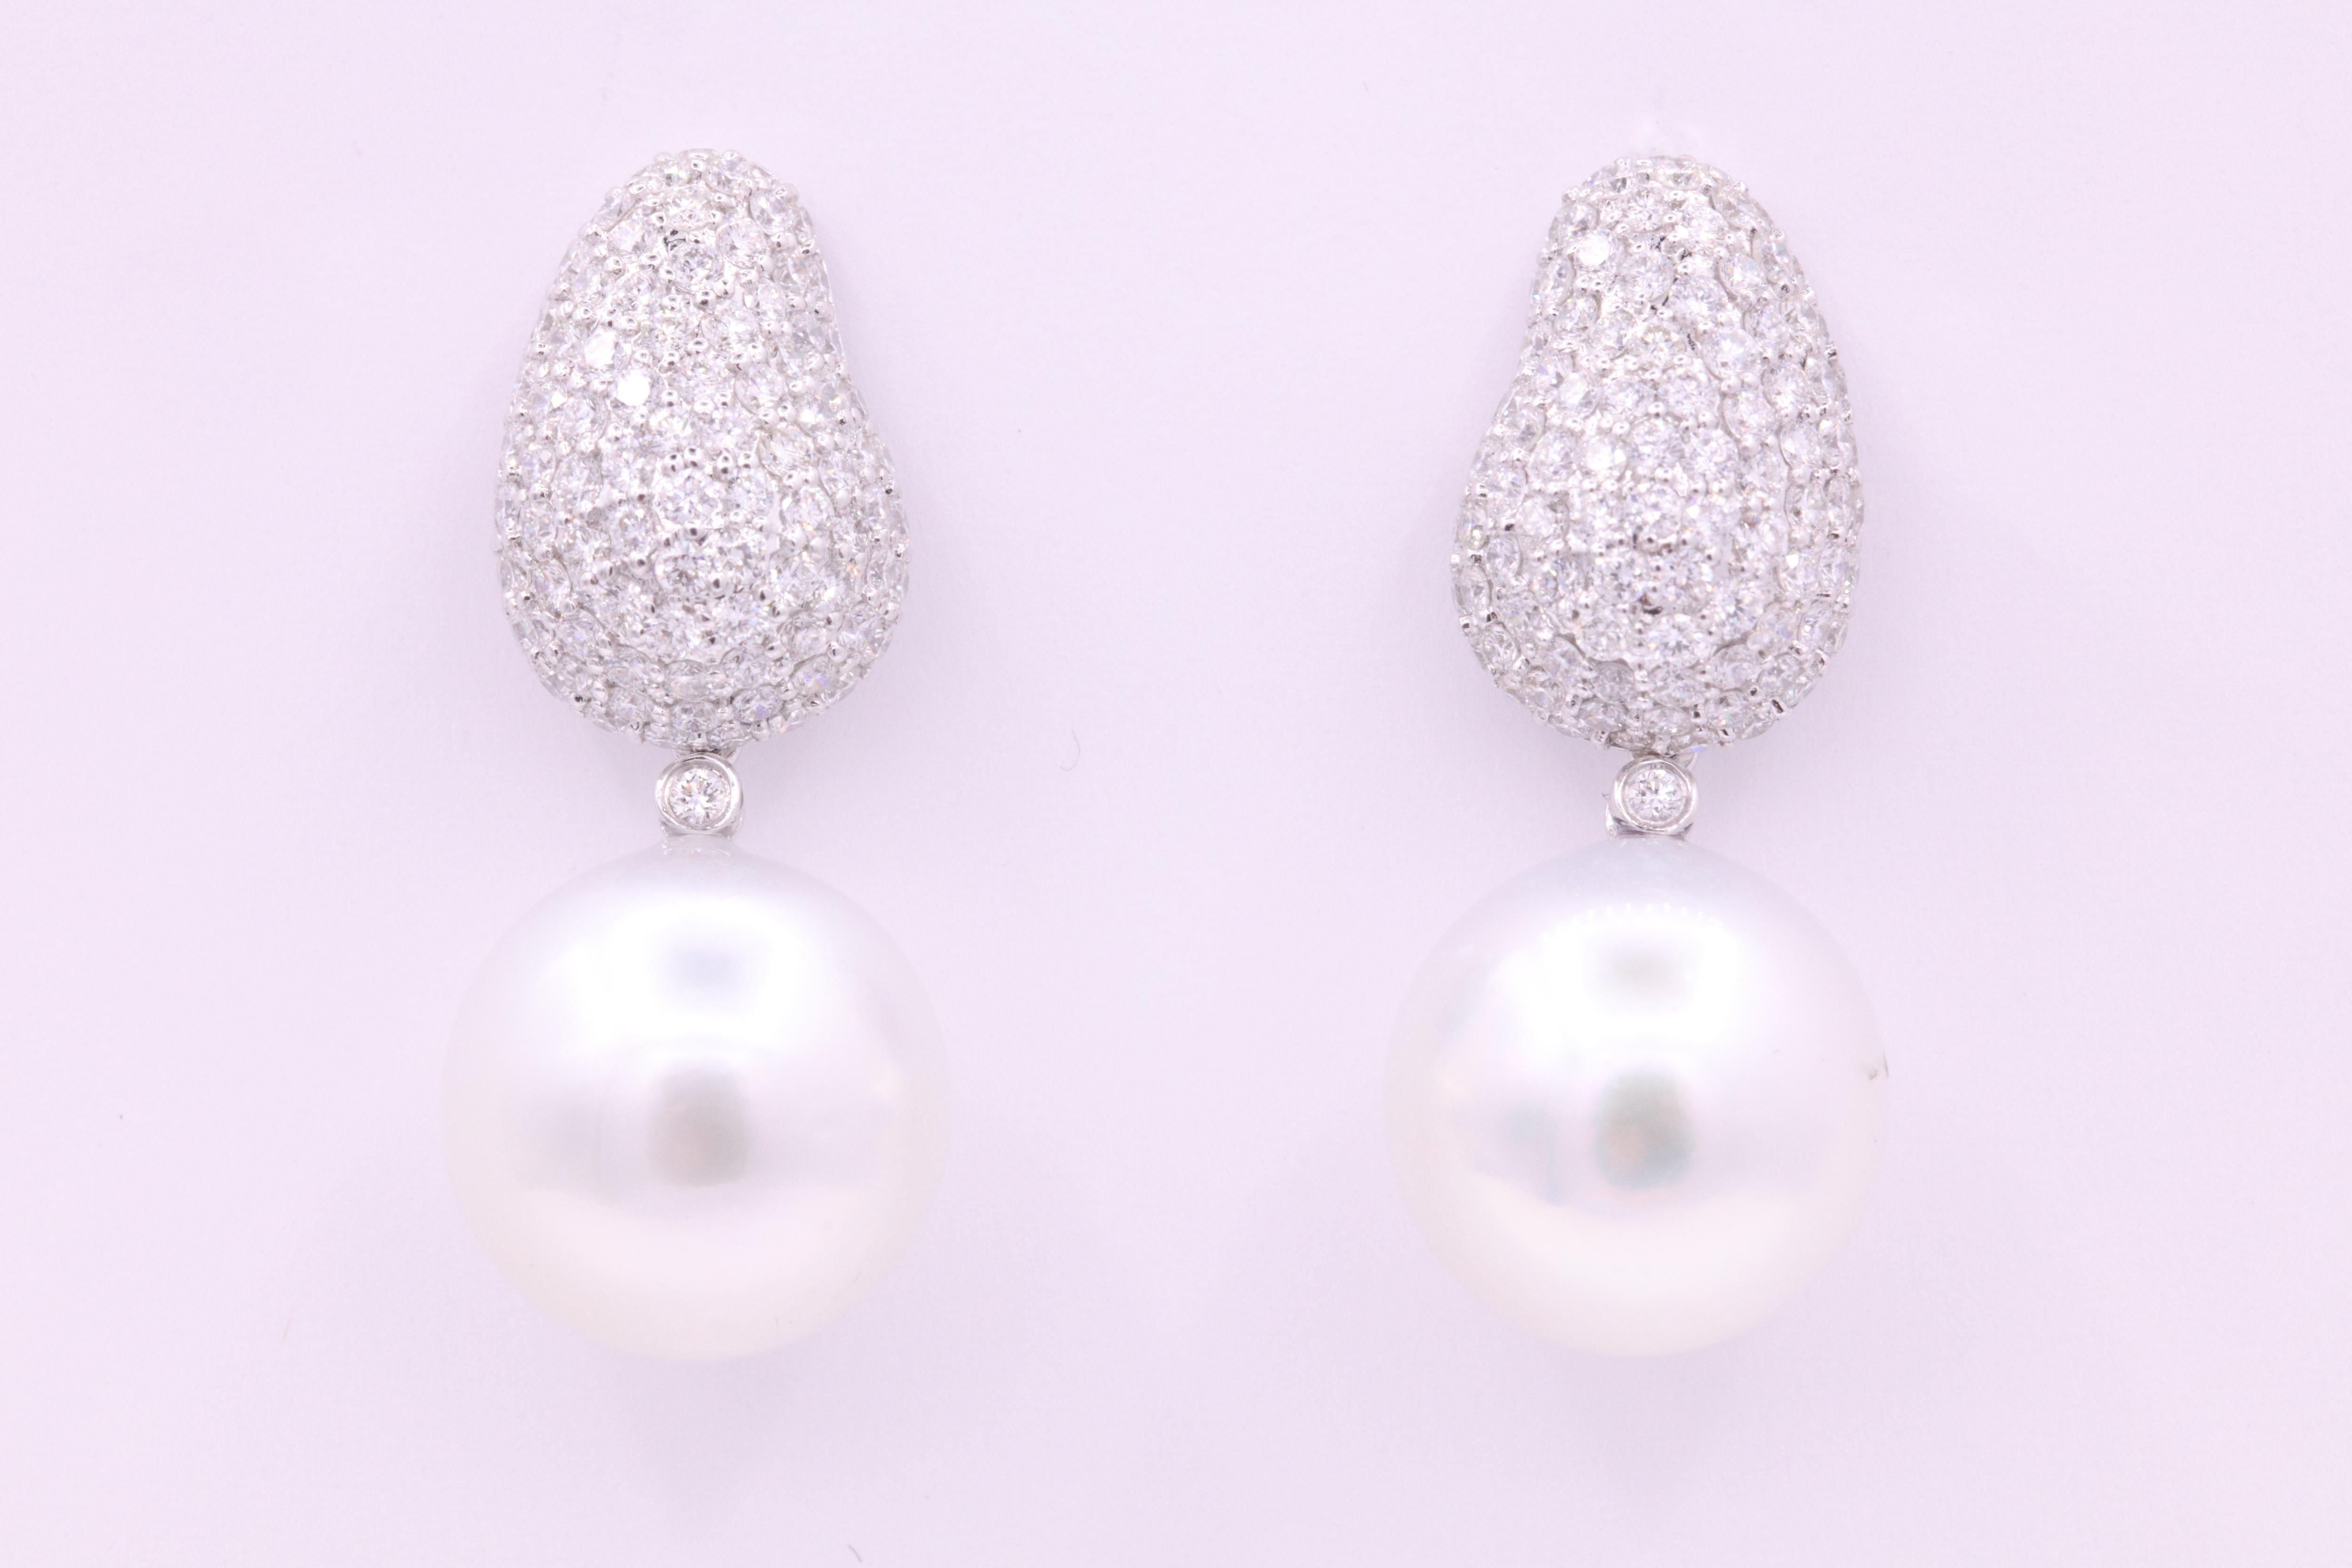 18K White gold earrings featuring two South Sea Pearls measuring 13-14 mm with a round brilliants weighing 2.50 carats. 